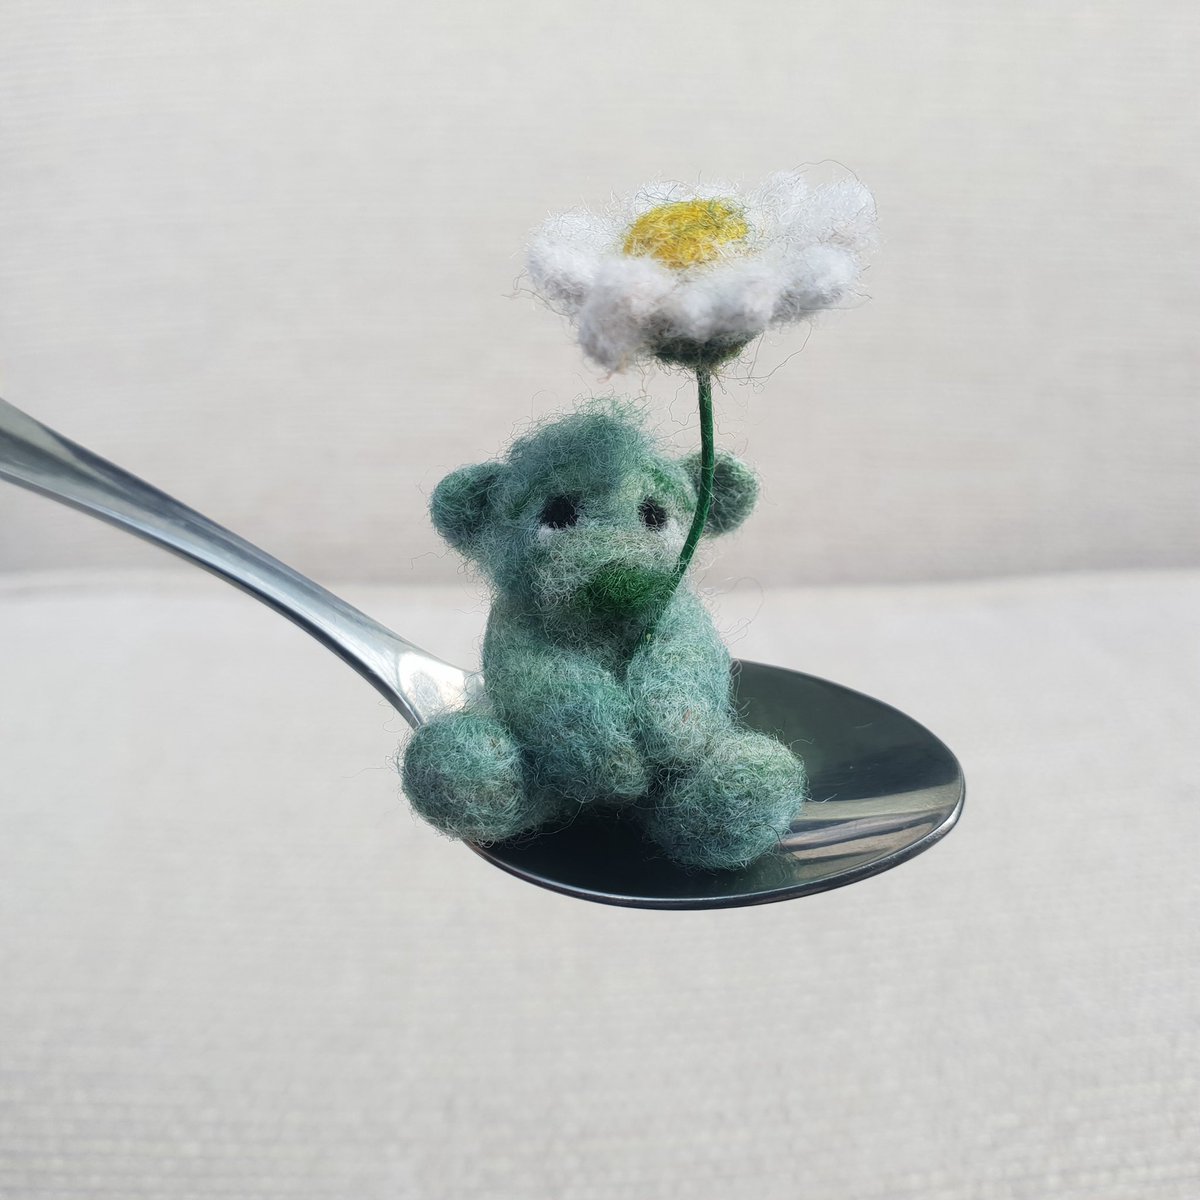 Hello! Sharing one of my favourite Bear creations with you. This is Daisy Boo and she’s thrilled that it’s #nomowmay. Can’t wait for the sun to shine and the daisies to open up again ❤️ therockingfelter.etsy.com/uk/listing/171… #etsy #daisies #flowers #bears #elevenseshour #firsttmaster